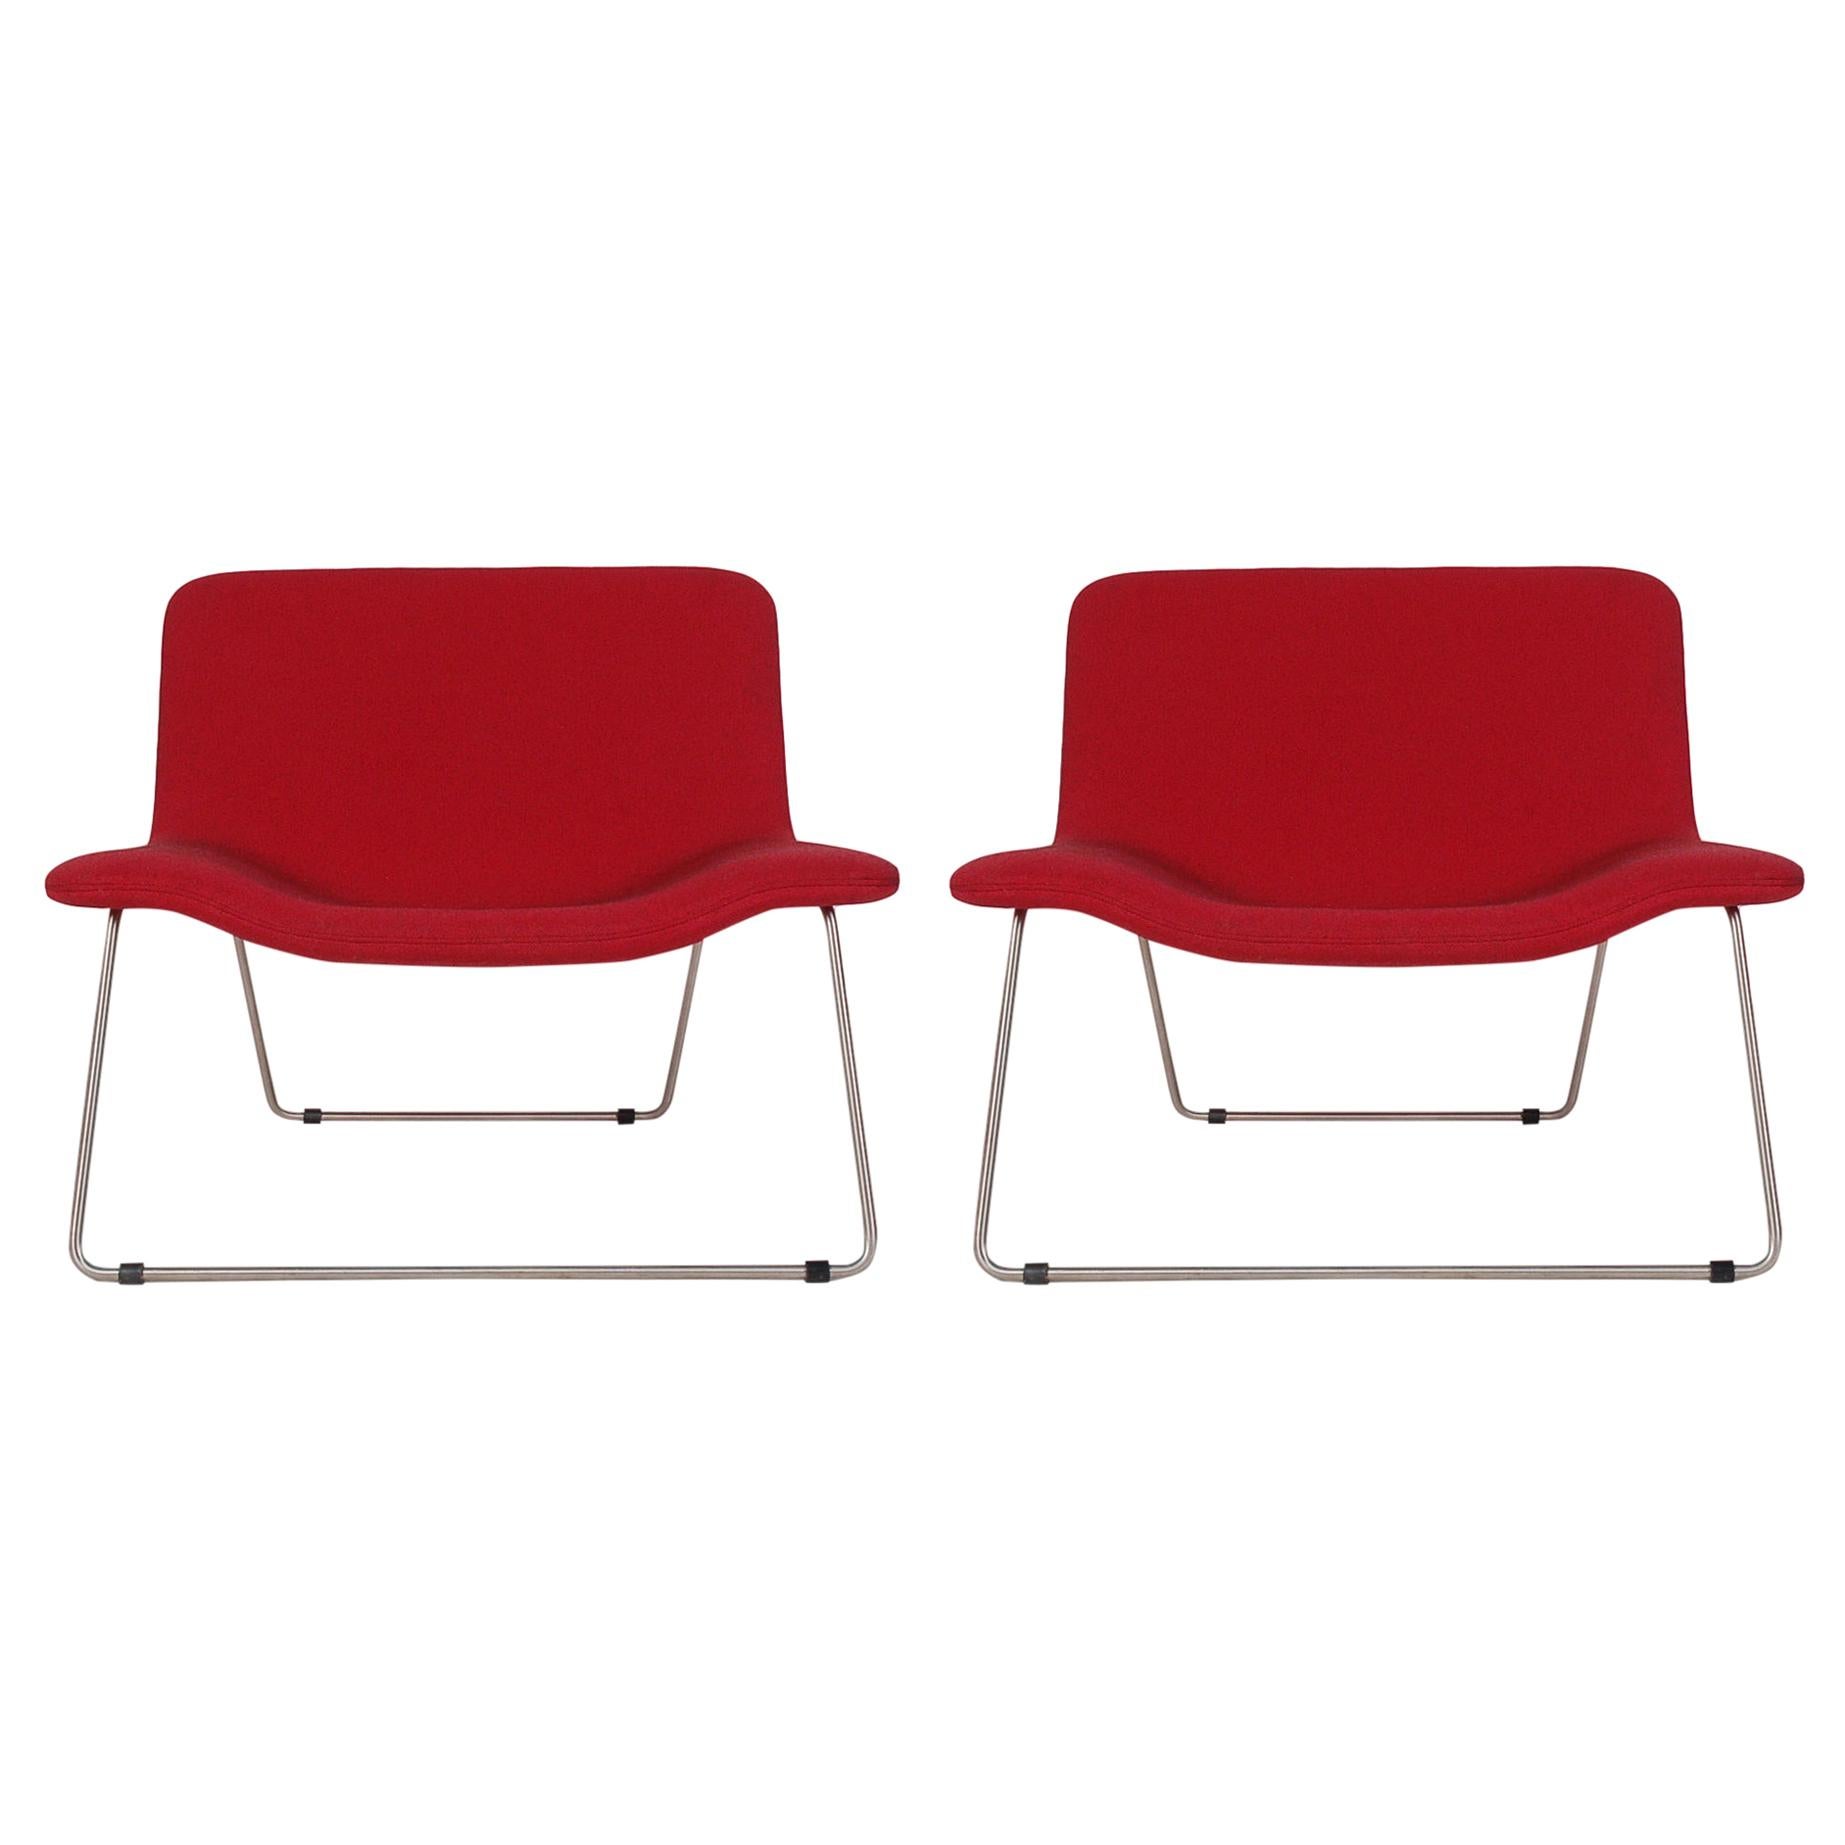 Matching Pair of Midcentury Italian Postmodern Red Lounge Chairs by Cappellini